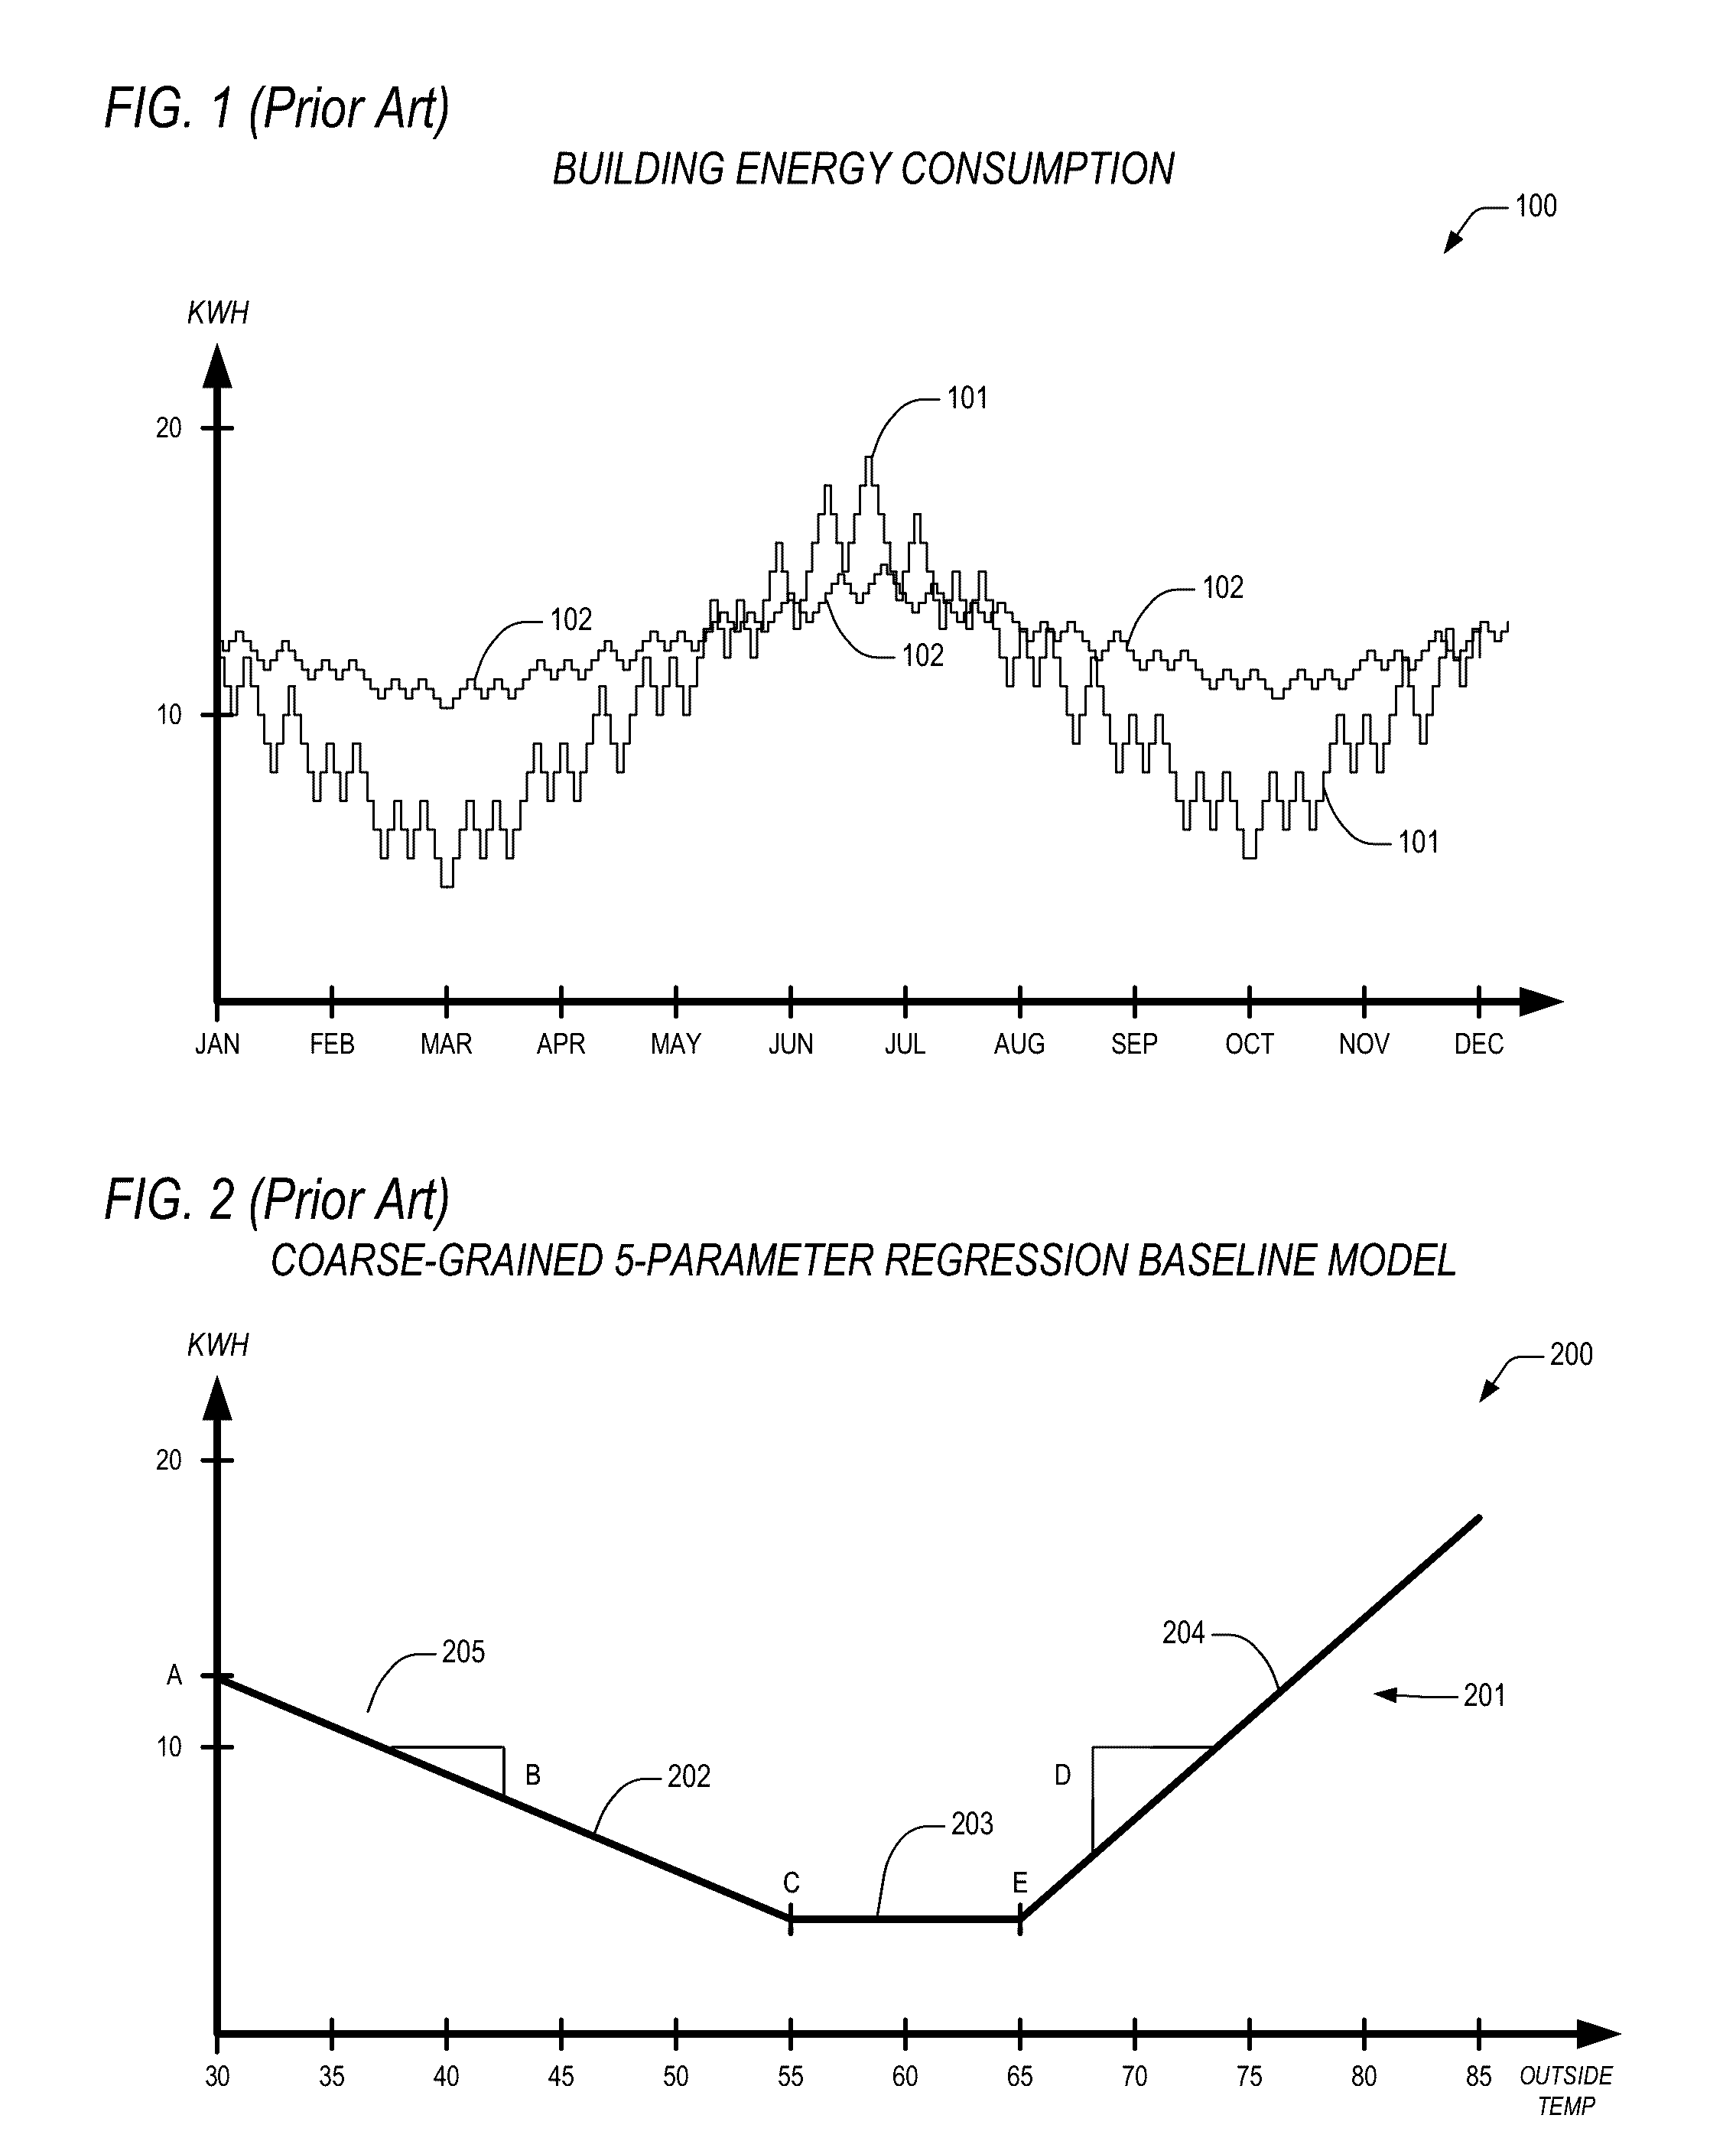 Apparatus and method for employing weather induced facility energy consumption characterizations in a demand response dispatch system